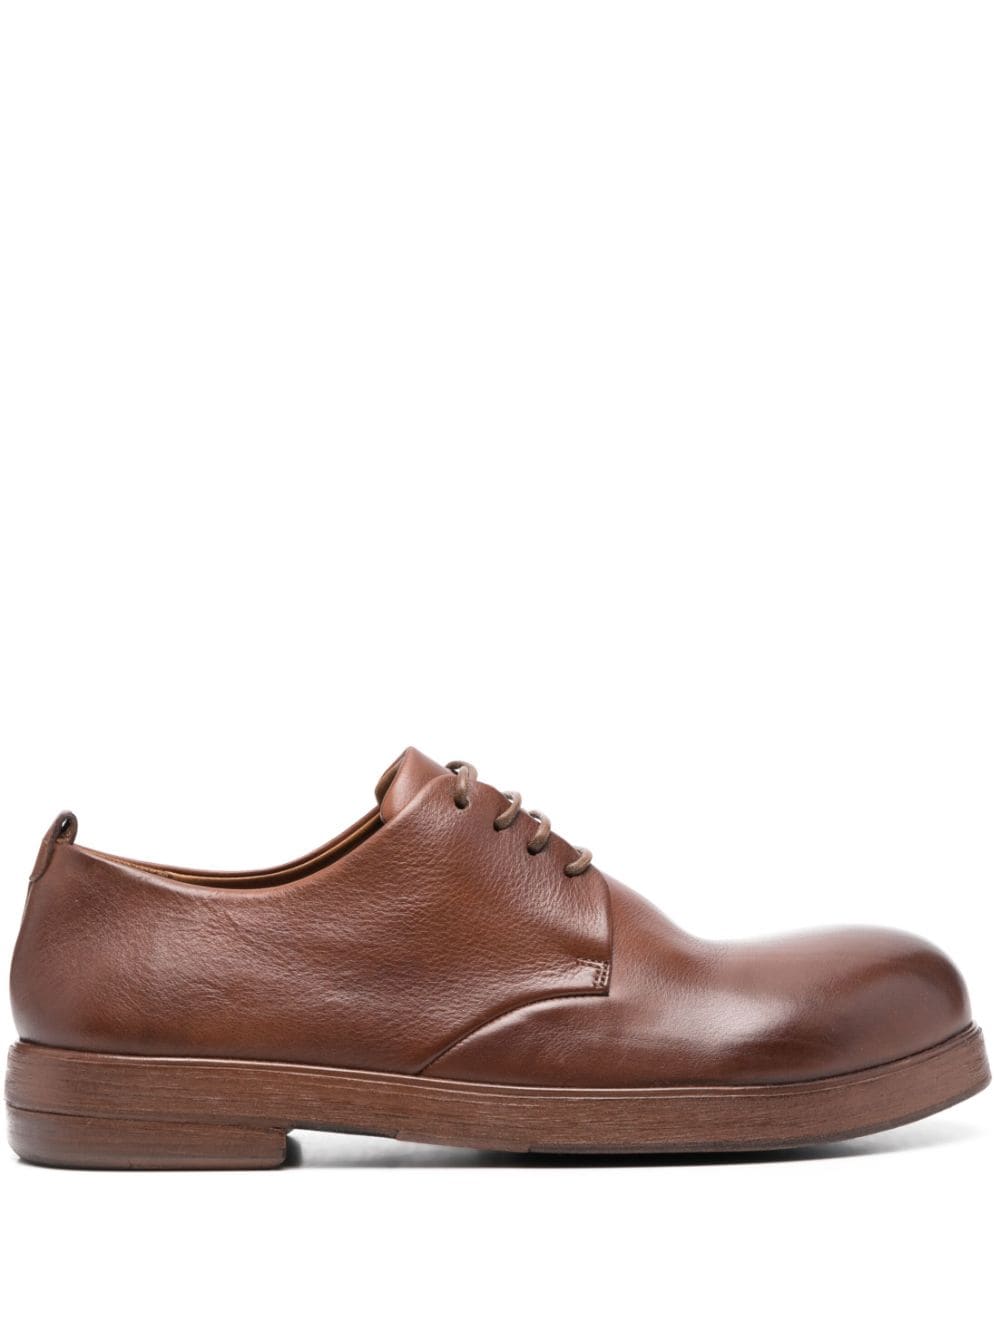 Marsèll lace-up leather derby shoes - Brown von Marsèll